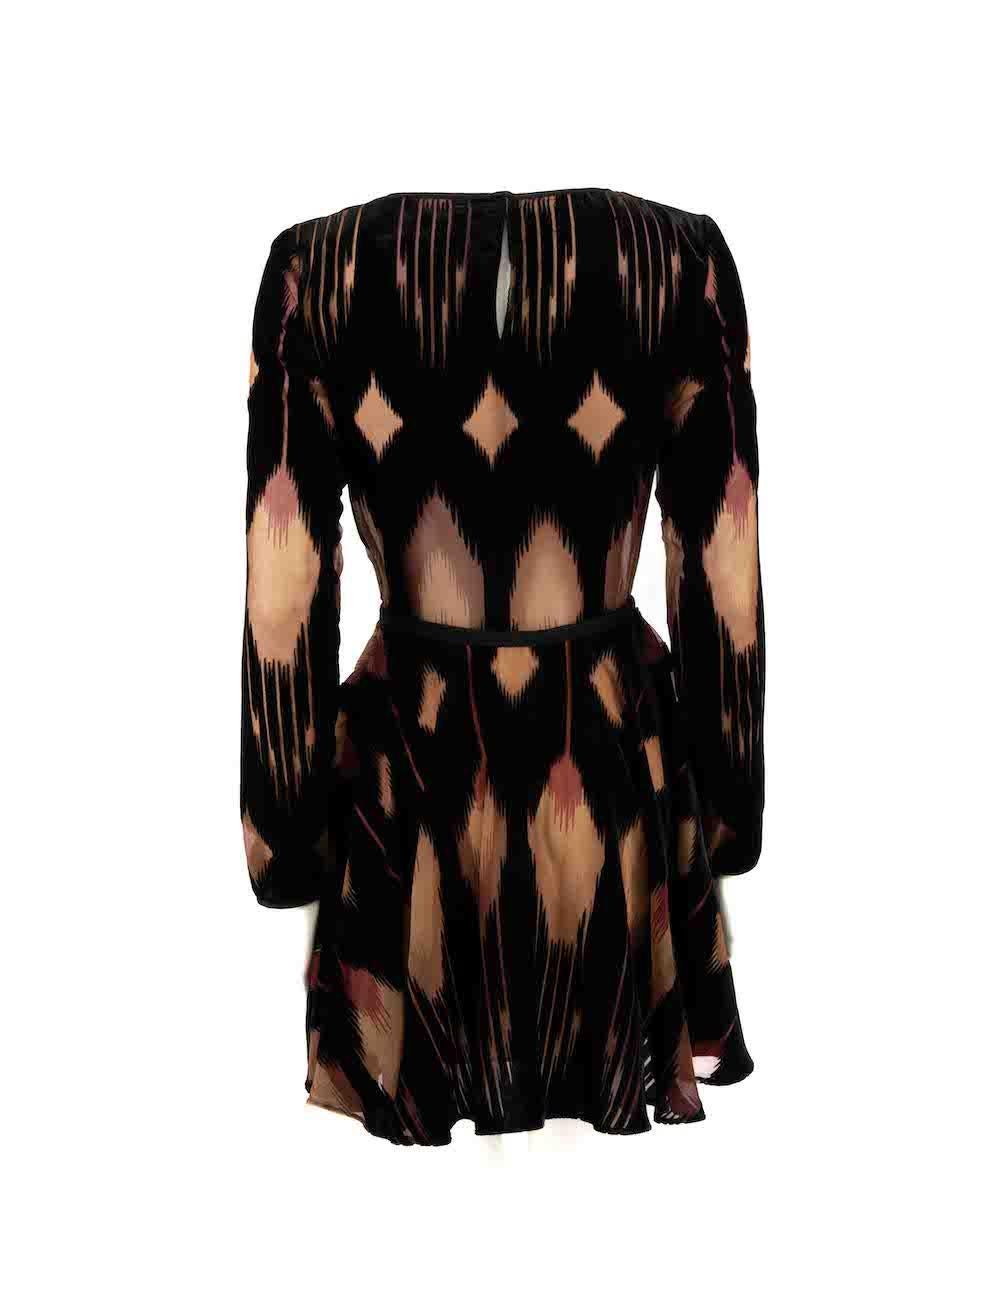 Pinko Black Velvet Flocked Abstract Mini Dress Size XS In Excellent Condition For Sale In London, GB